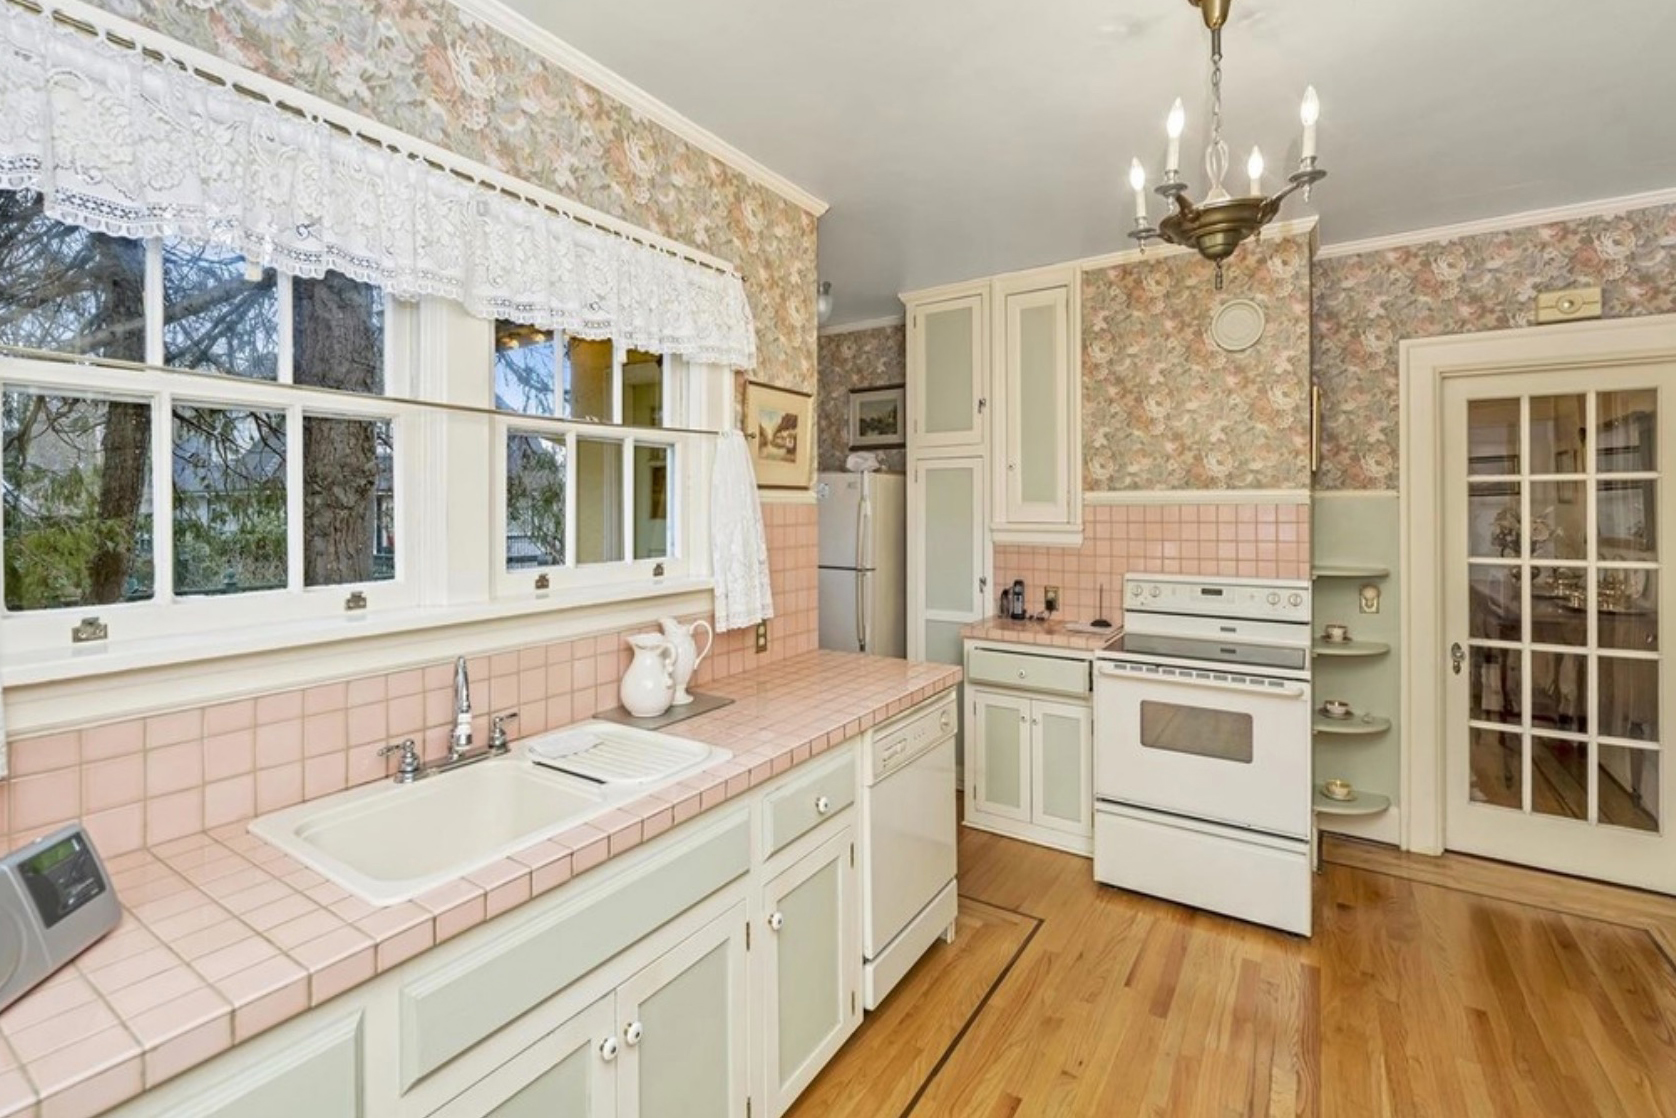 kitchen sink with pink tiled counters